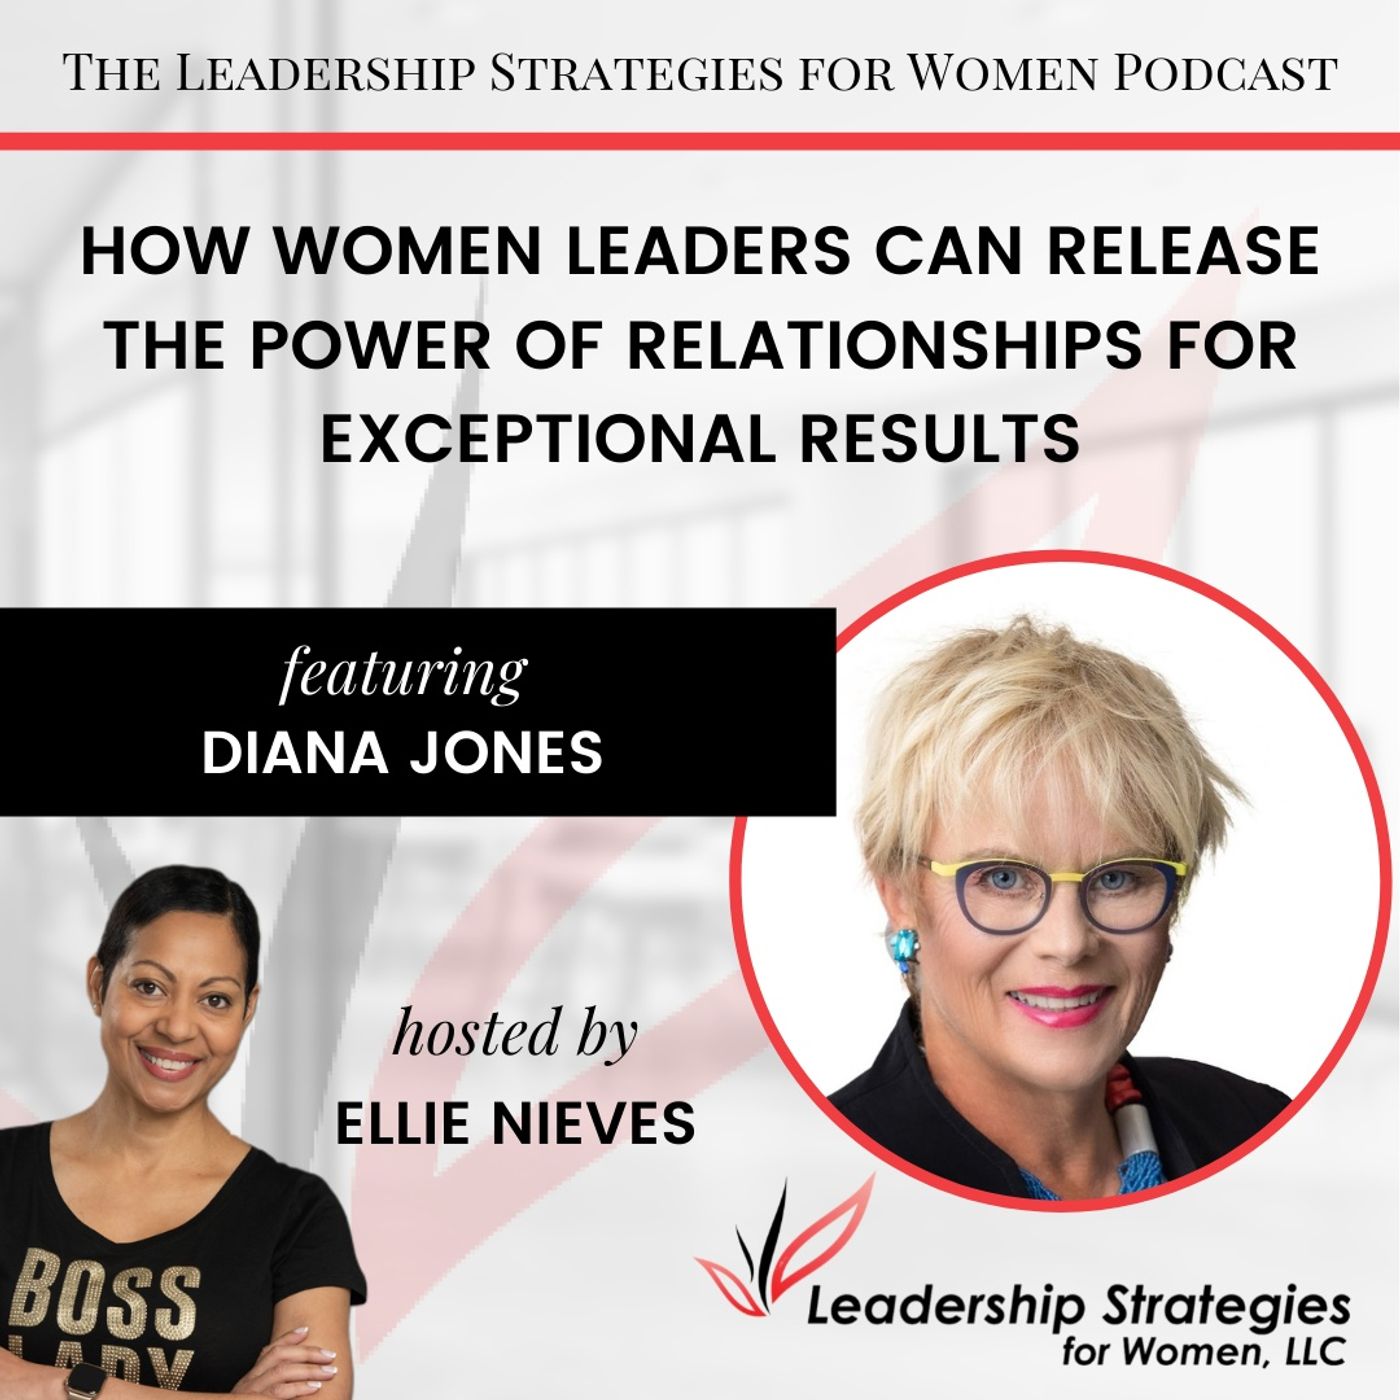 How Women Leaders Can Release the Power of Relationships for Exceptional Results